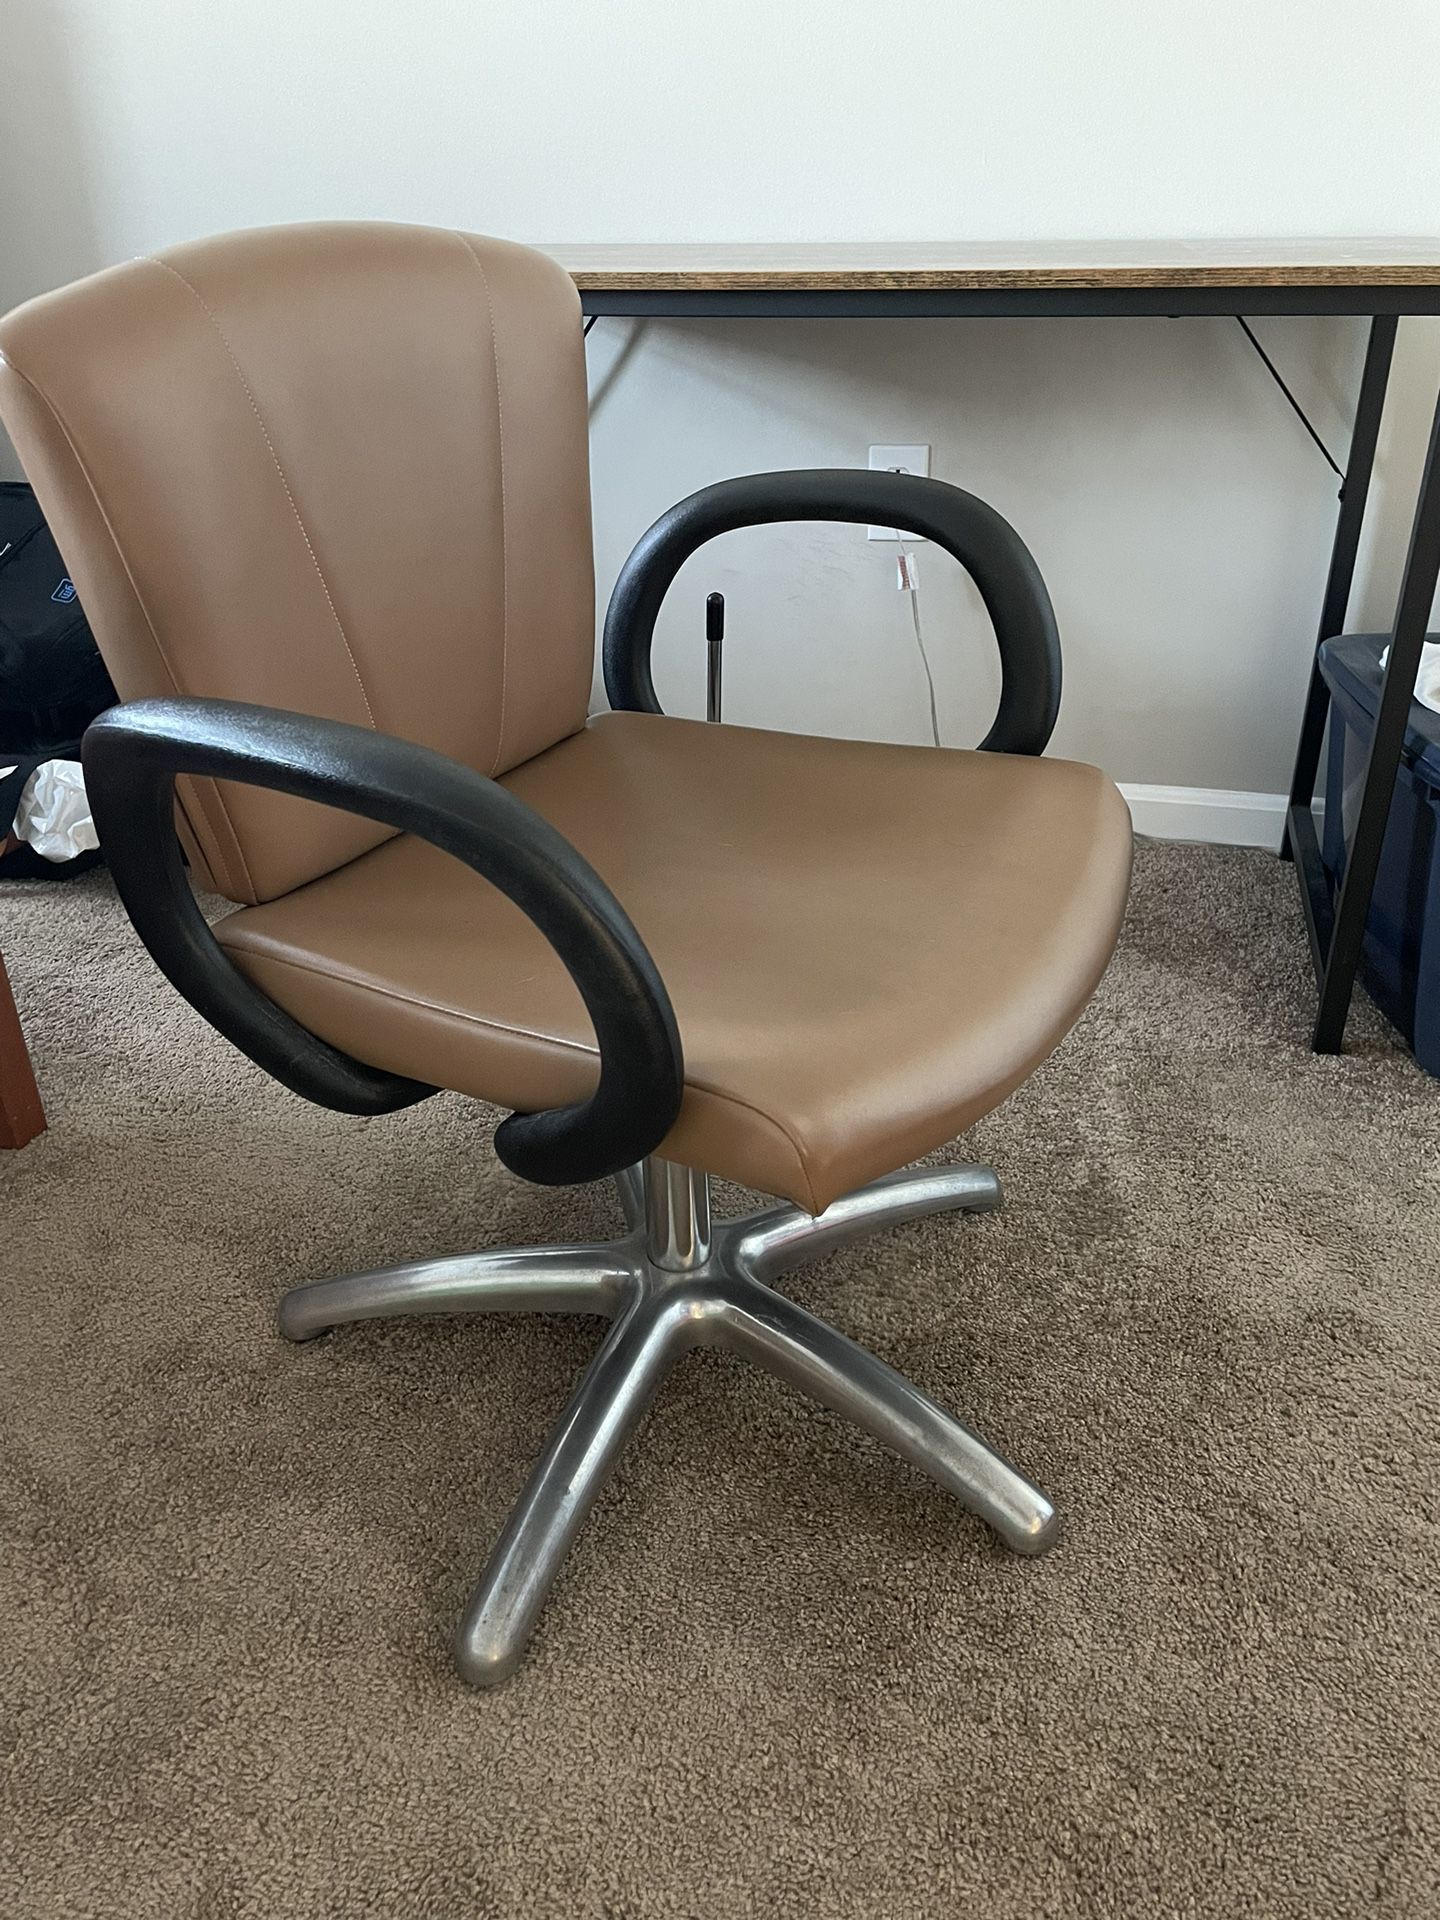 Faux Leather Reclining Chair - $20